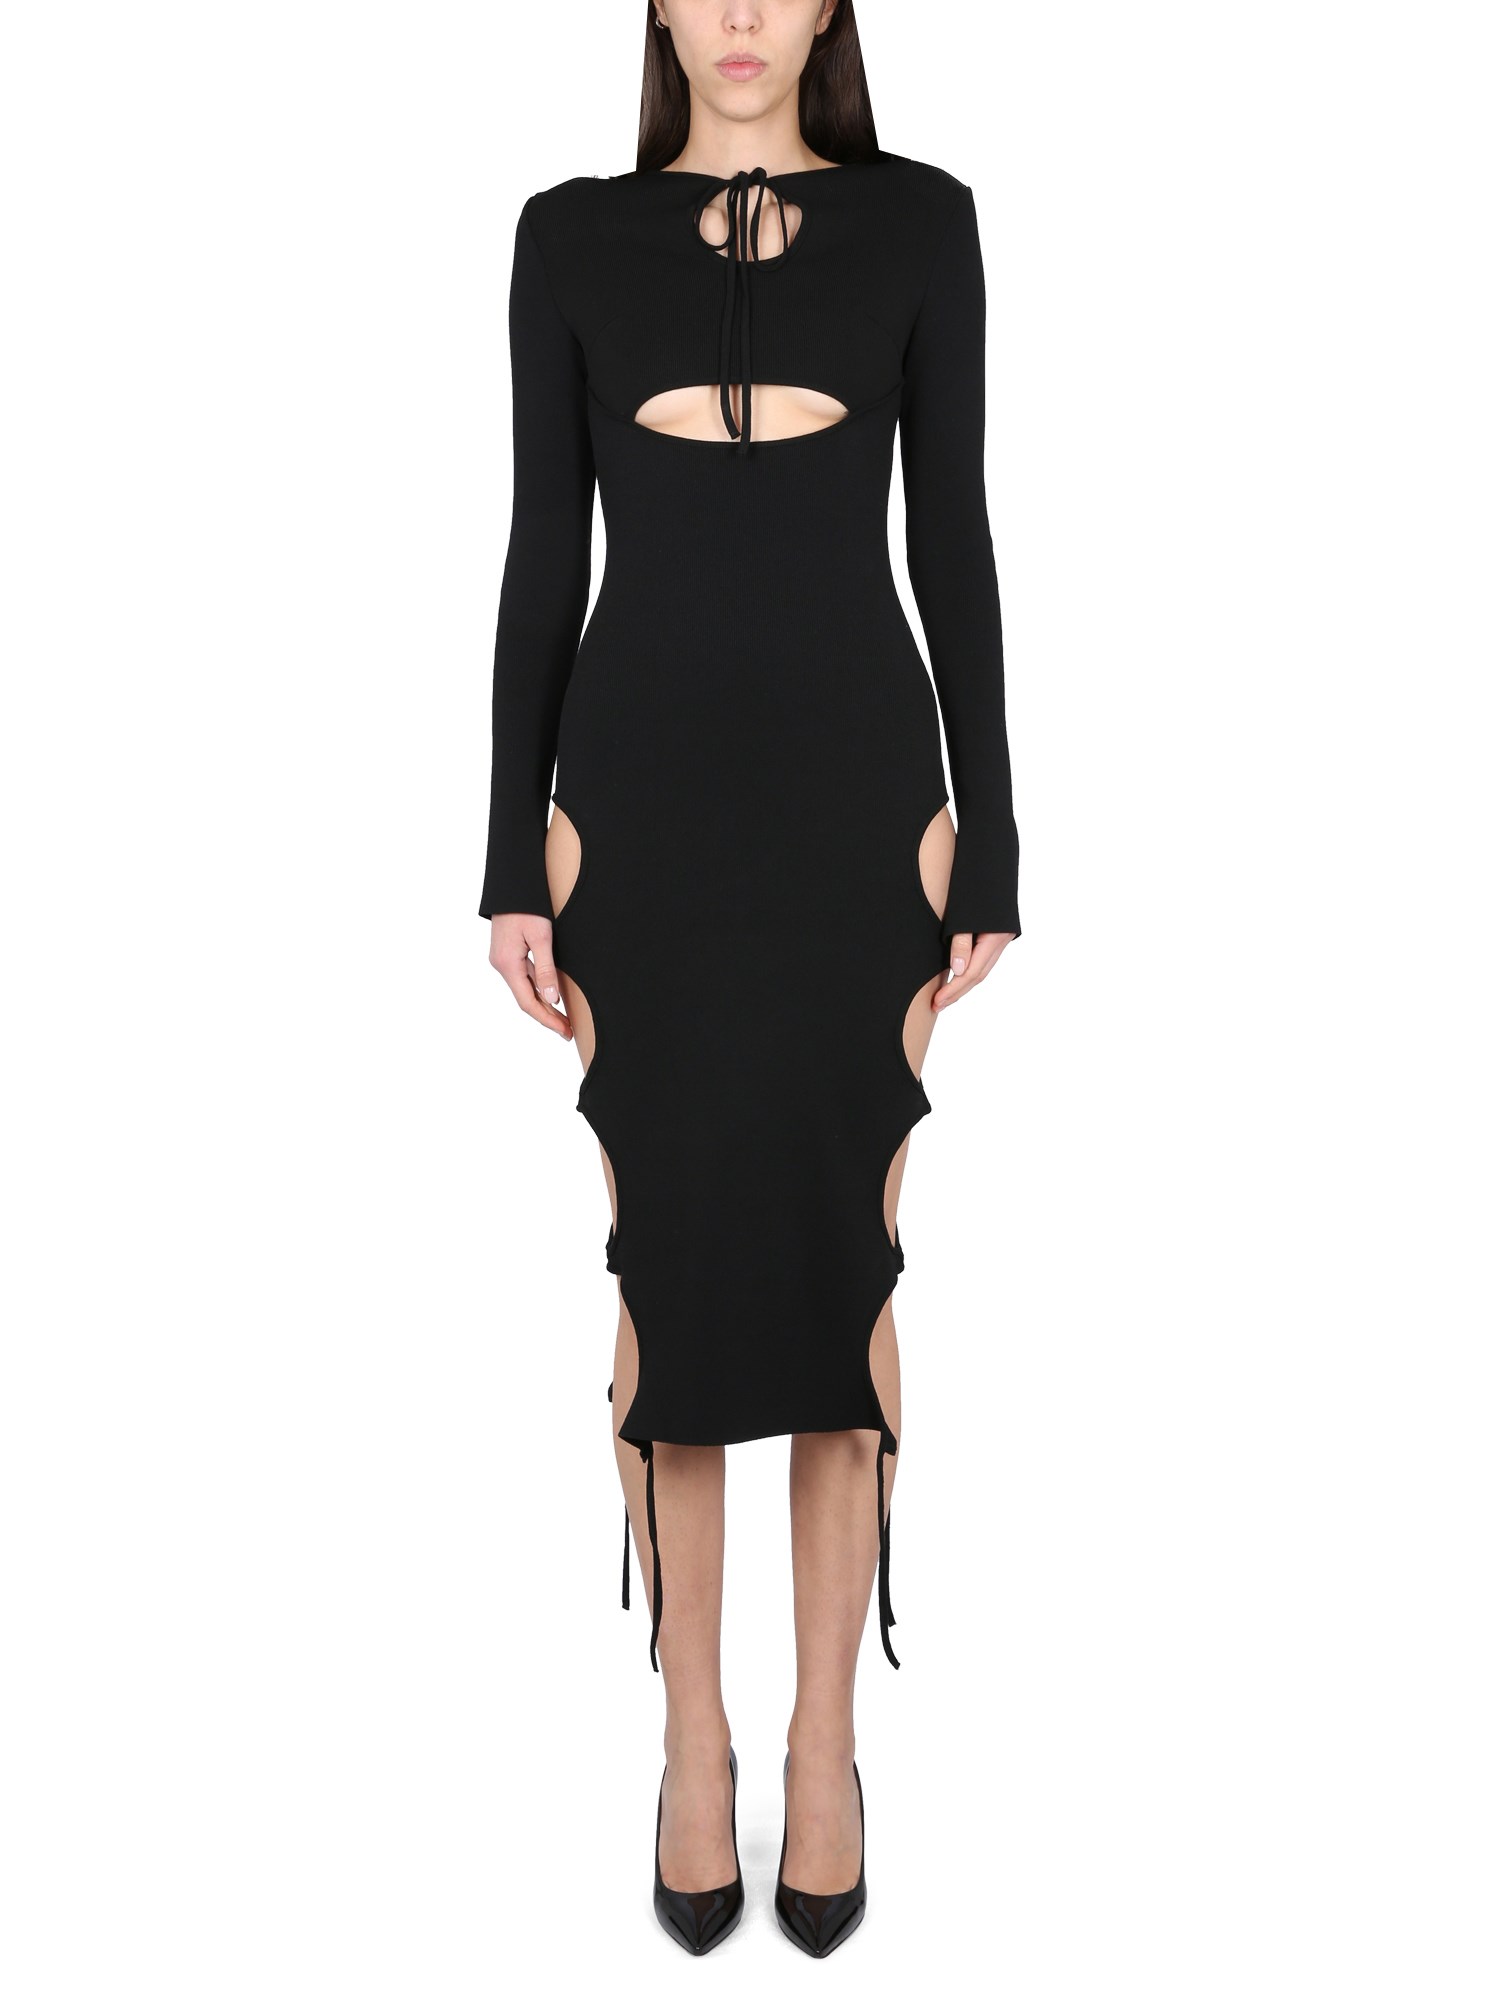 andreadamo dress with cut-out details